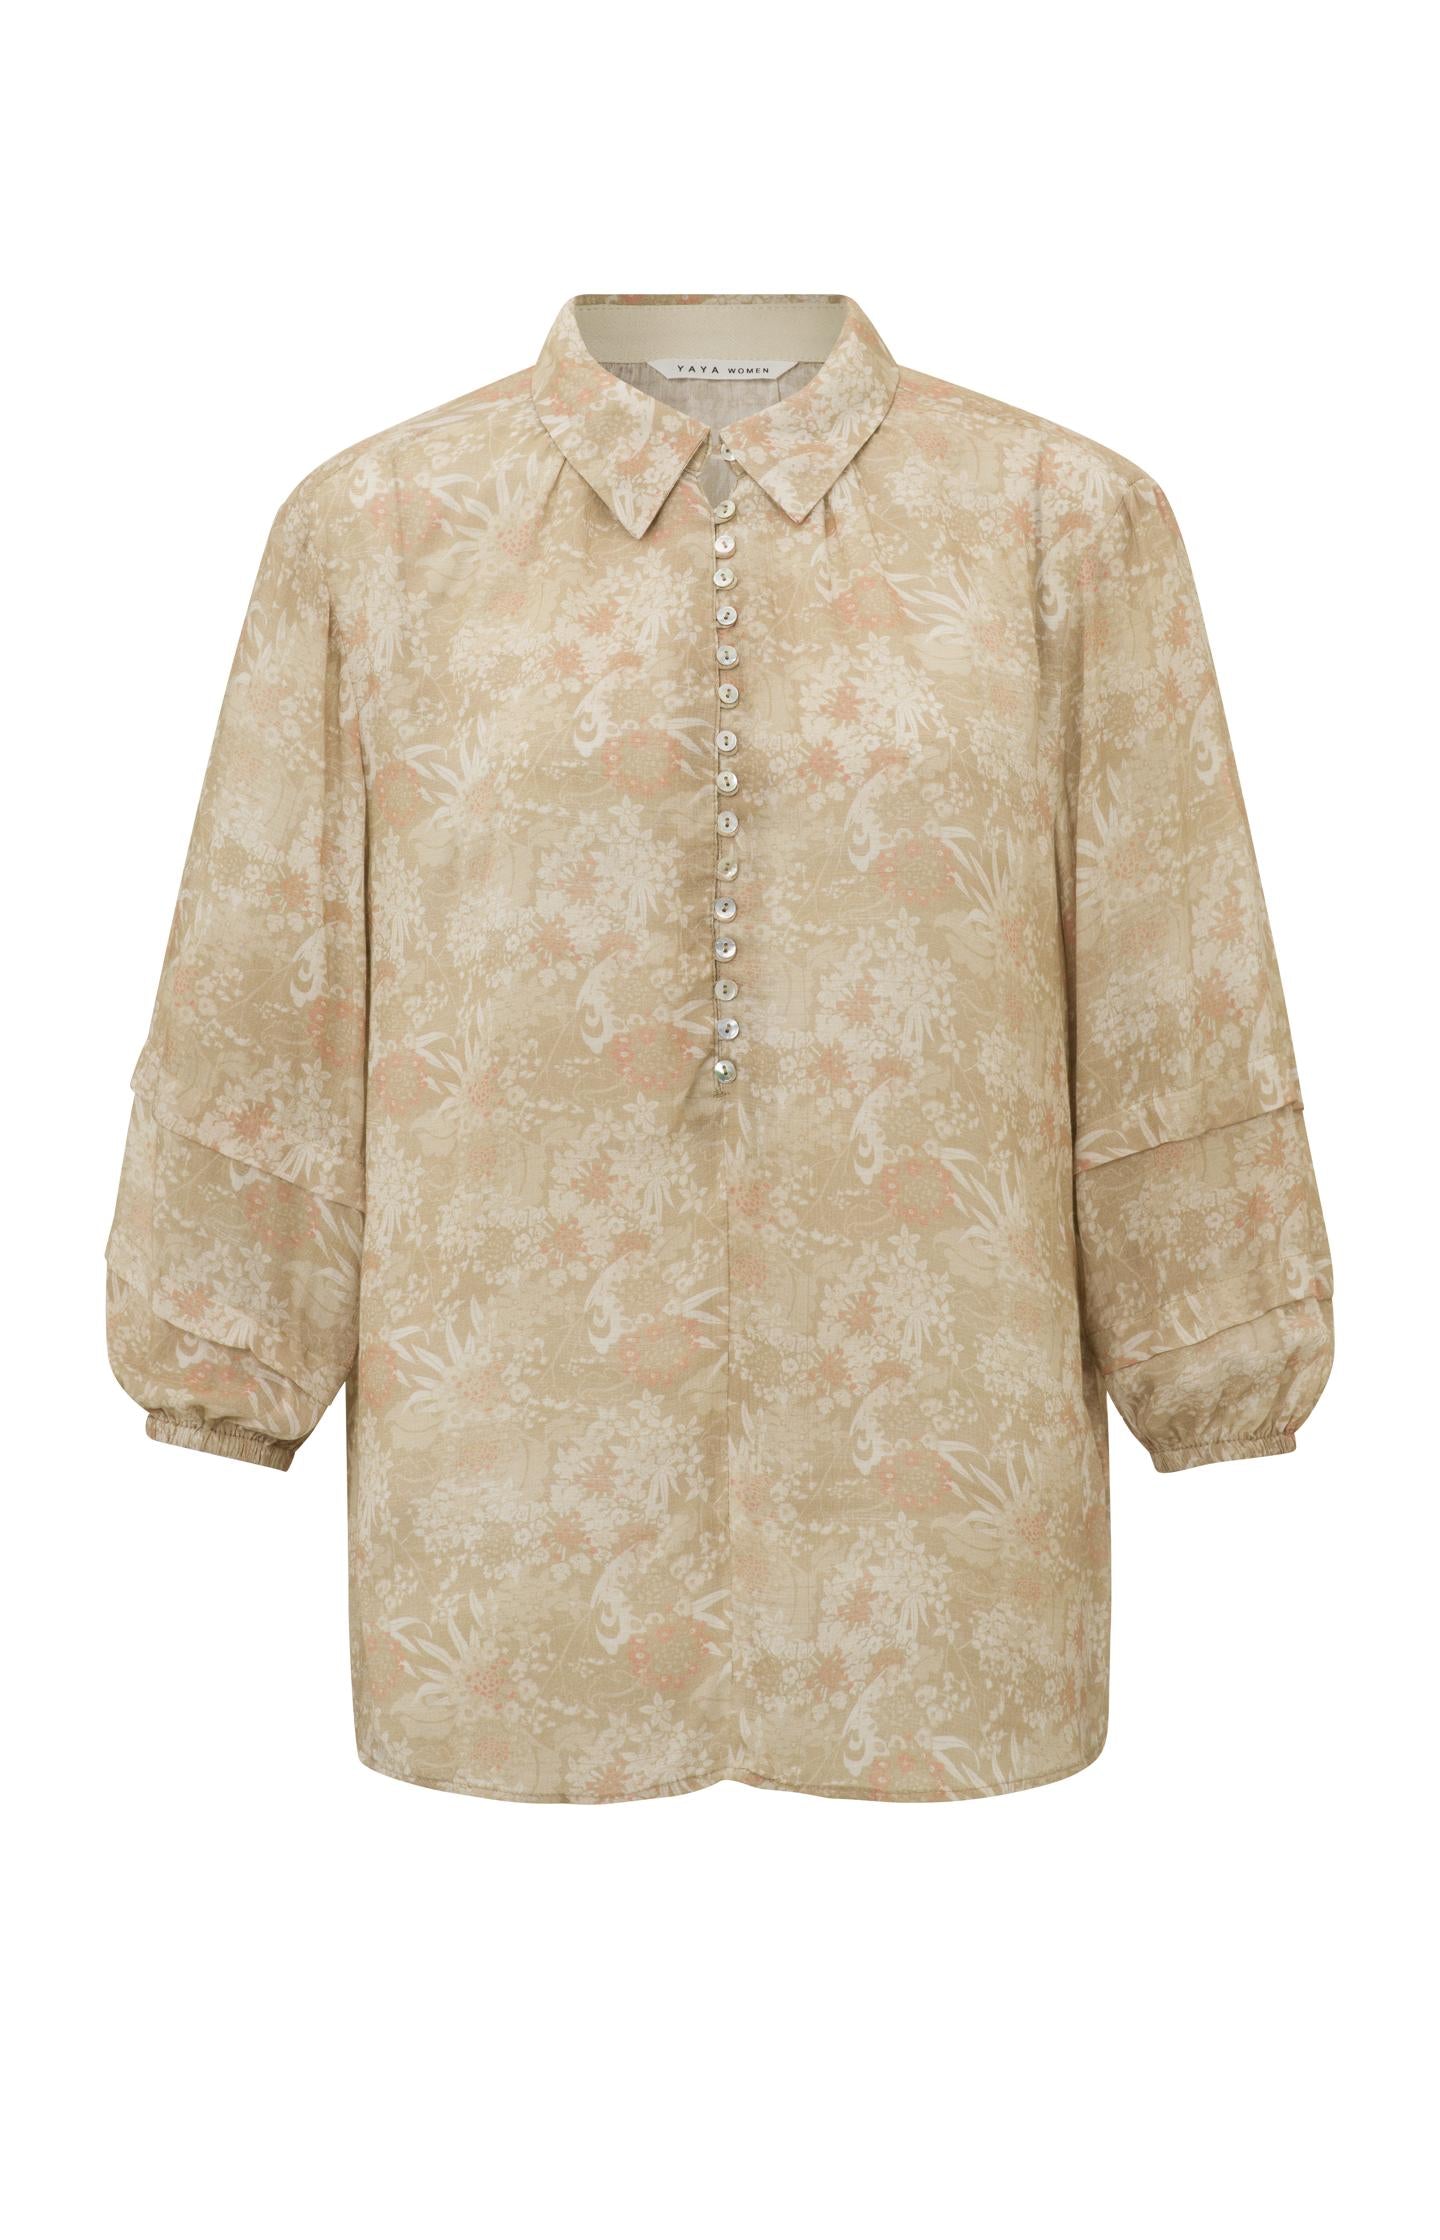 Blouse with 7/8 balloon sleeves, buttons and floral print - Type: product